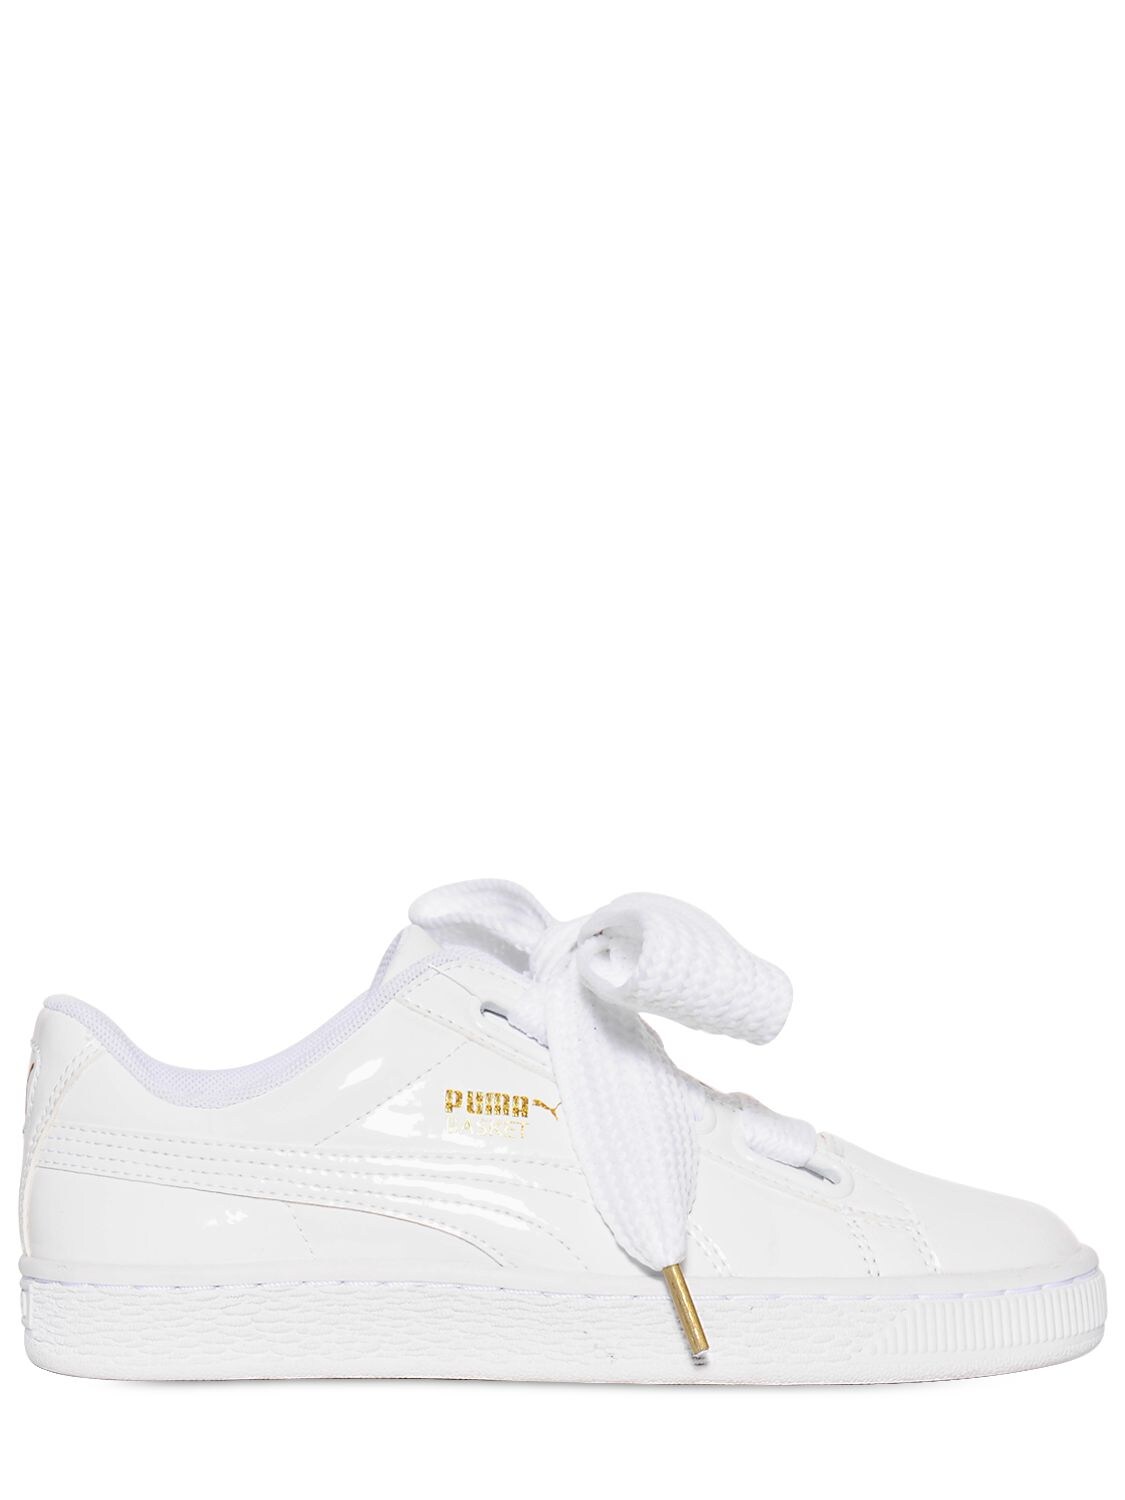 Puma Basket Heart Patent Leather Sneakers In White